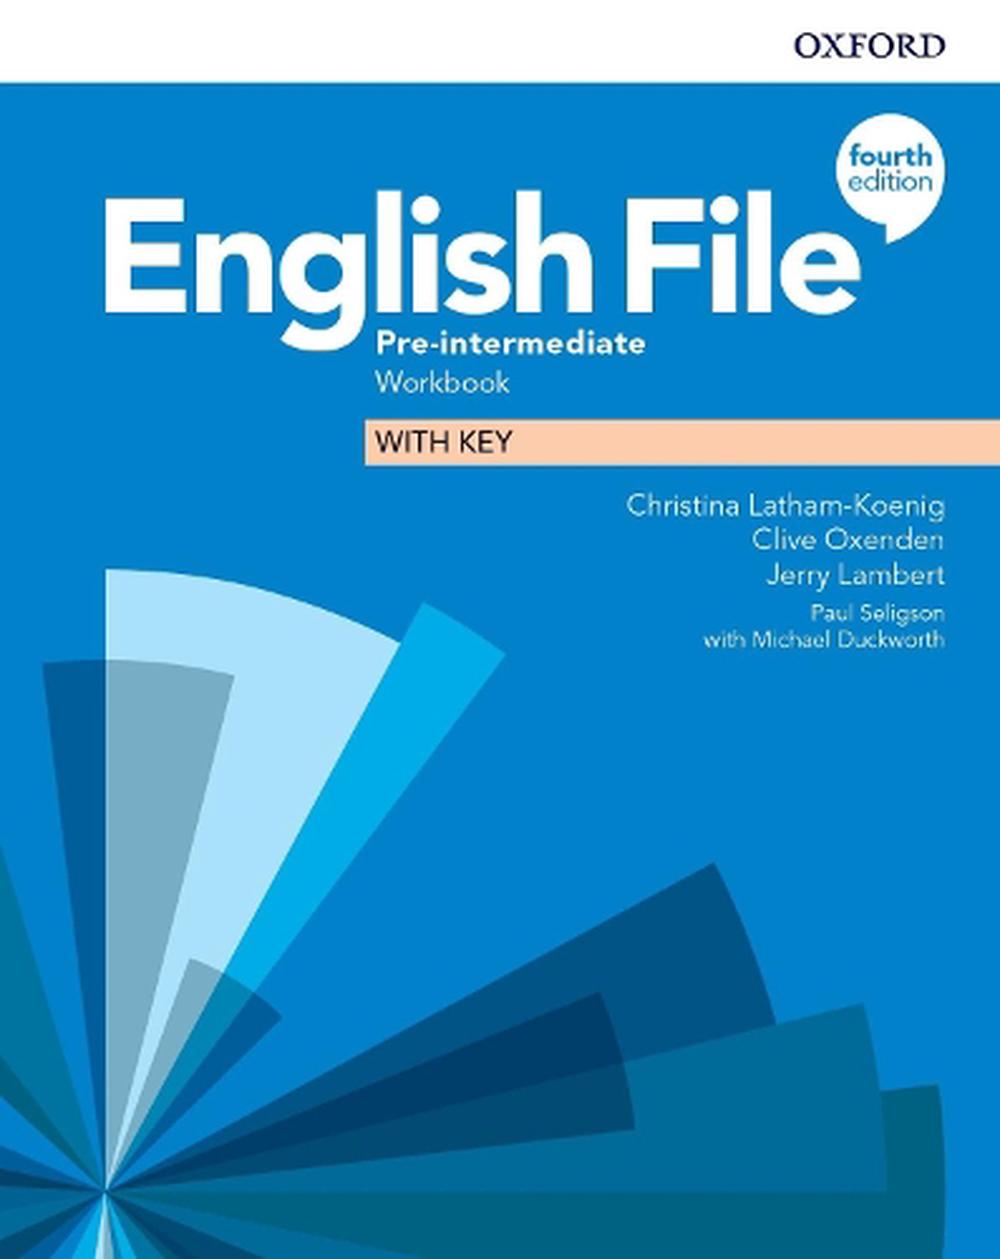 Pre-Intermediate:　English　with　Paperback,　Edition　Oxenden,　Key,　at　The　4th　by　Buy　Clive　online　9780194037686　Nile　File:　Workbook